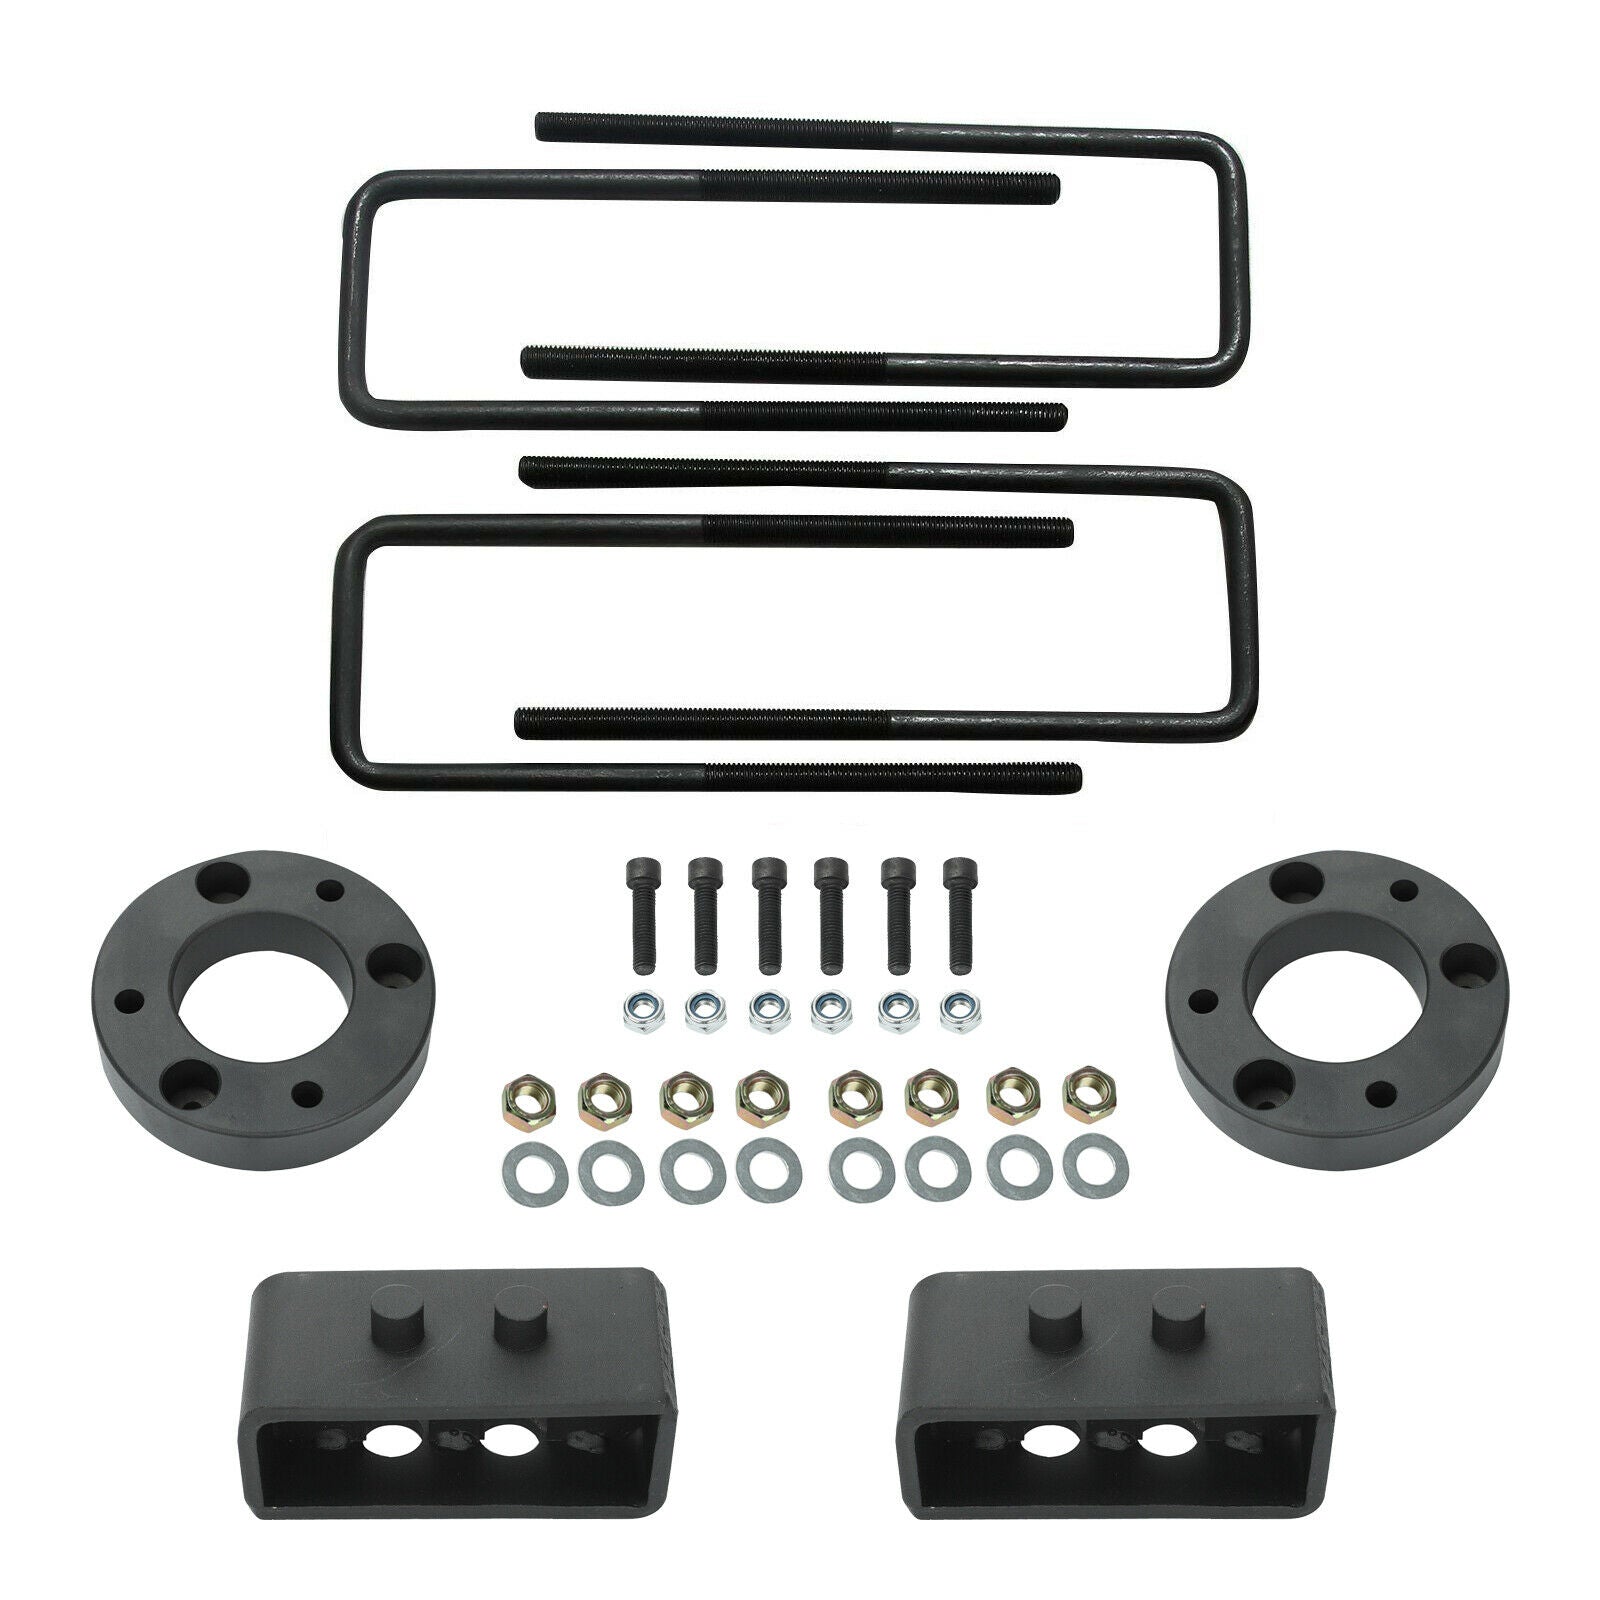 New 3'' Front and 2'' Rear Leveling lift kit Fits For Ford F150 4WD 2004-2014 - www.blackhorse-racing.com